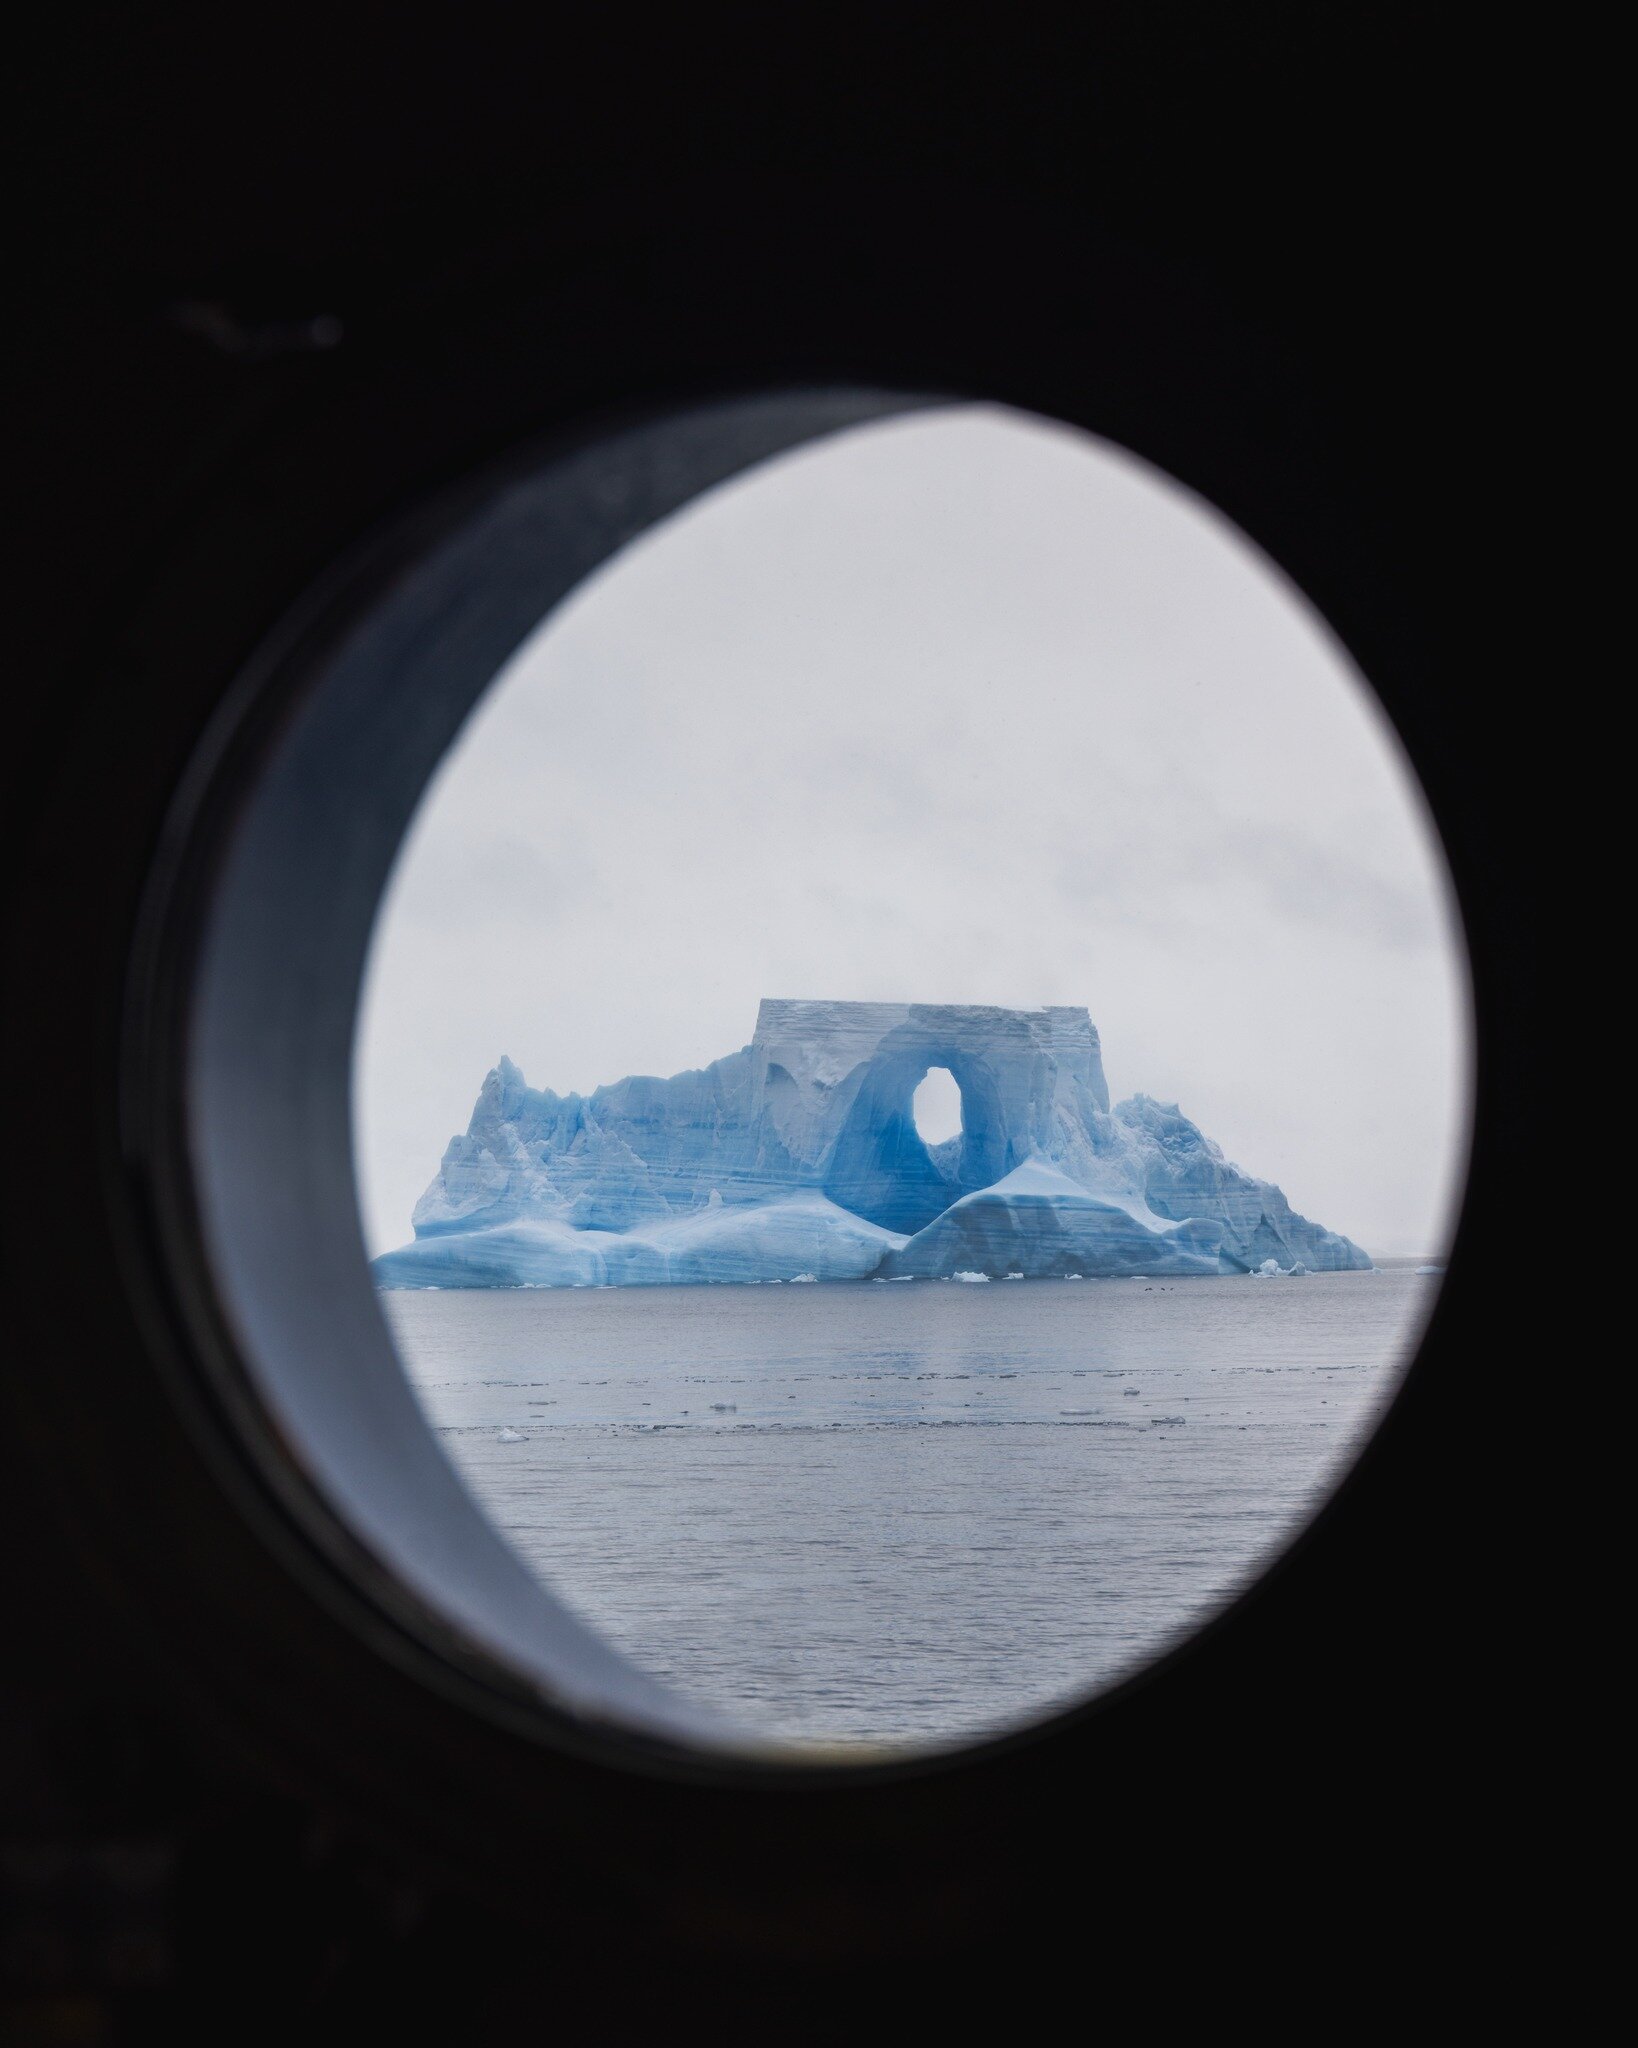 This beautiful Iceberg Arch is sitting just west of Useful Island in Antarctica. It will likely break apart soon with any amount of rough wind or weather. Even ocean swell can cause shifts in the weight and cause the ice to snap, crack, and pull apar